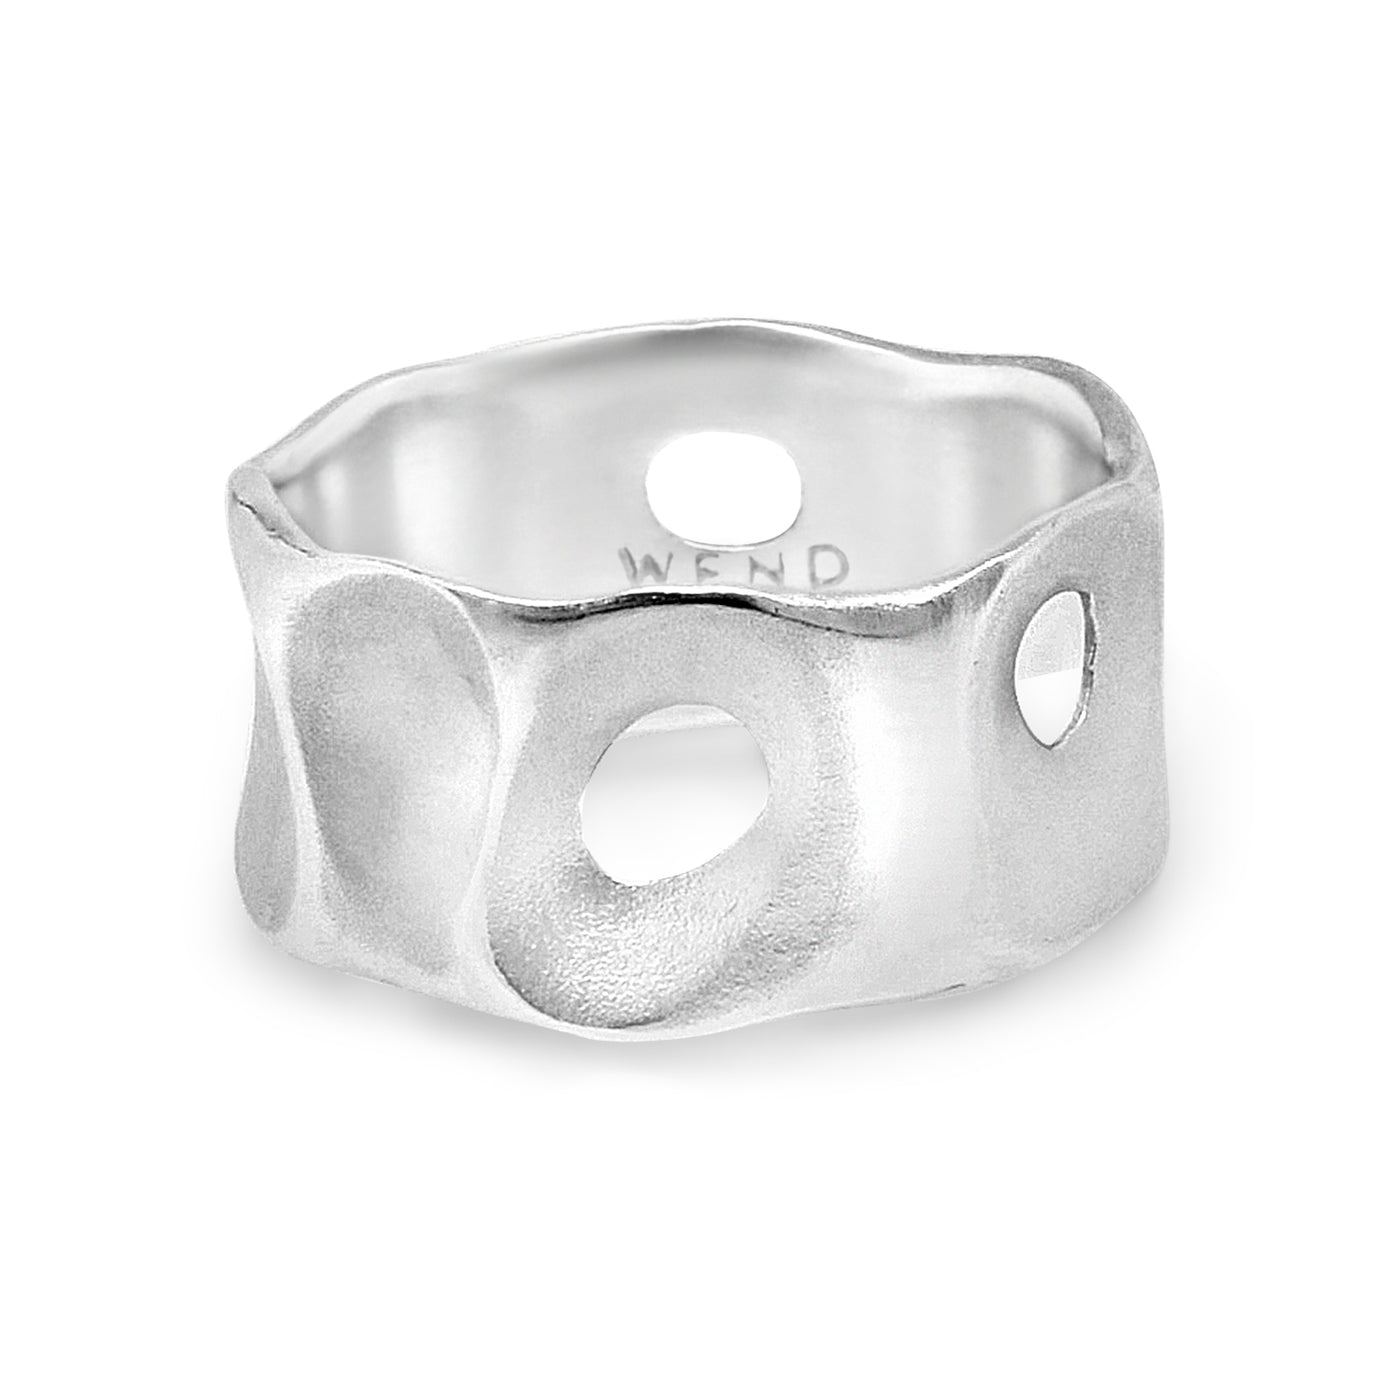 Tidepools ring band inspired by ocean tide pools made from certified recycled gold by WEND Jewelry